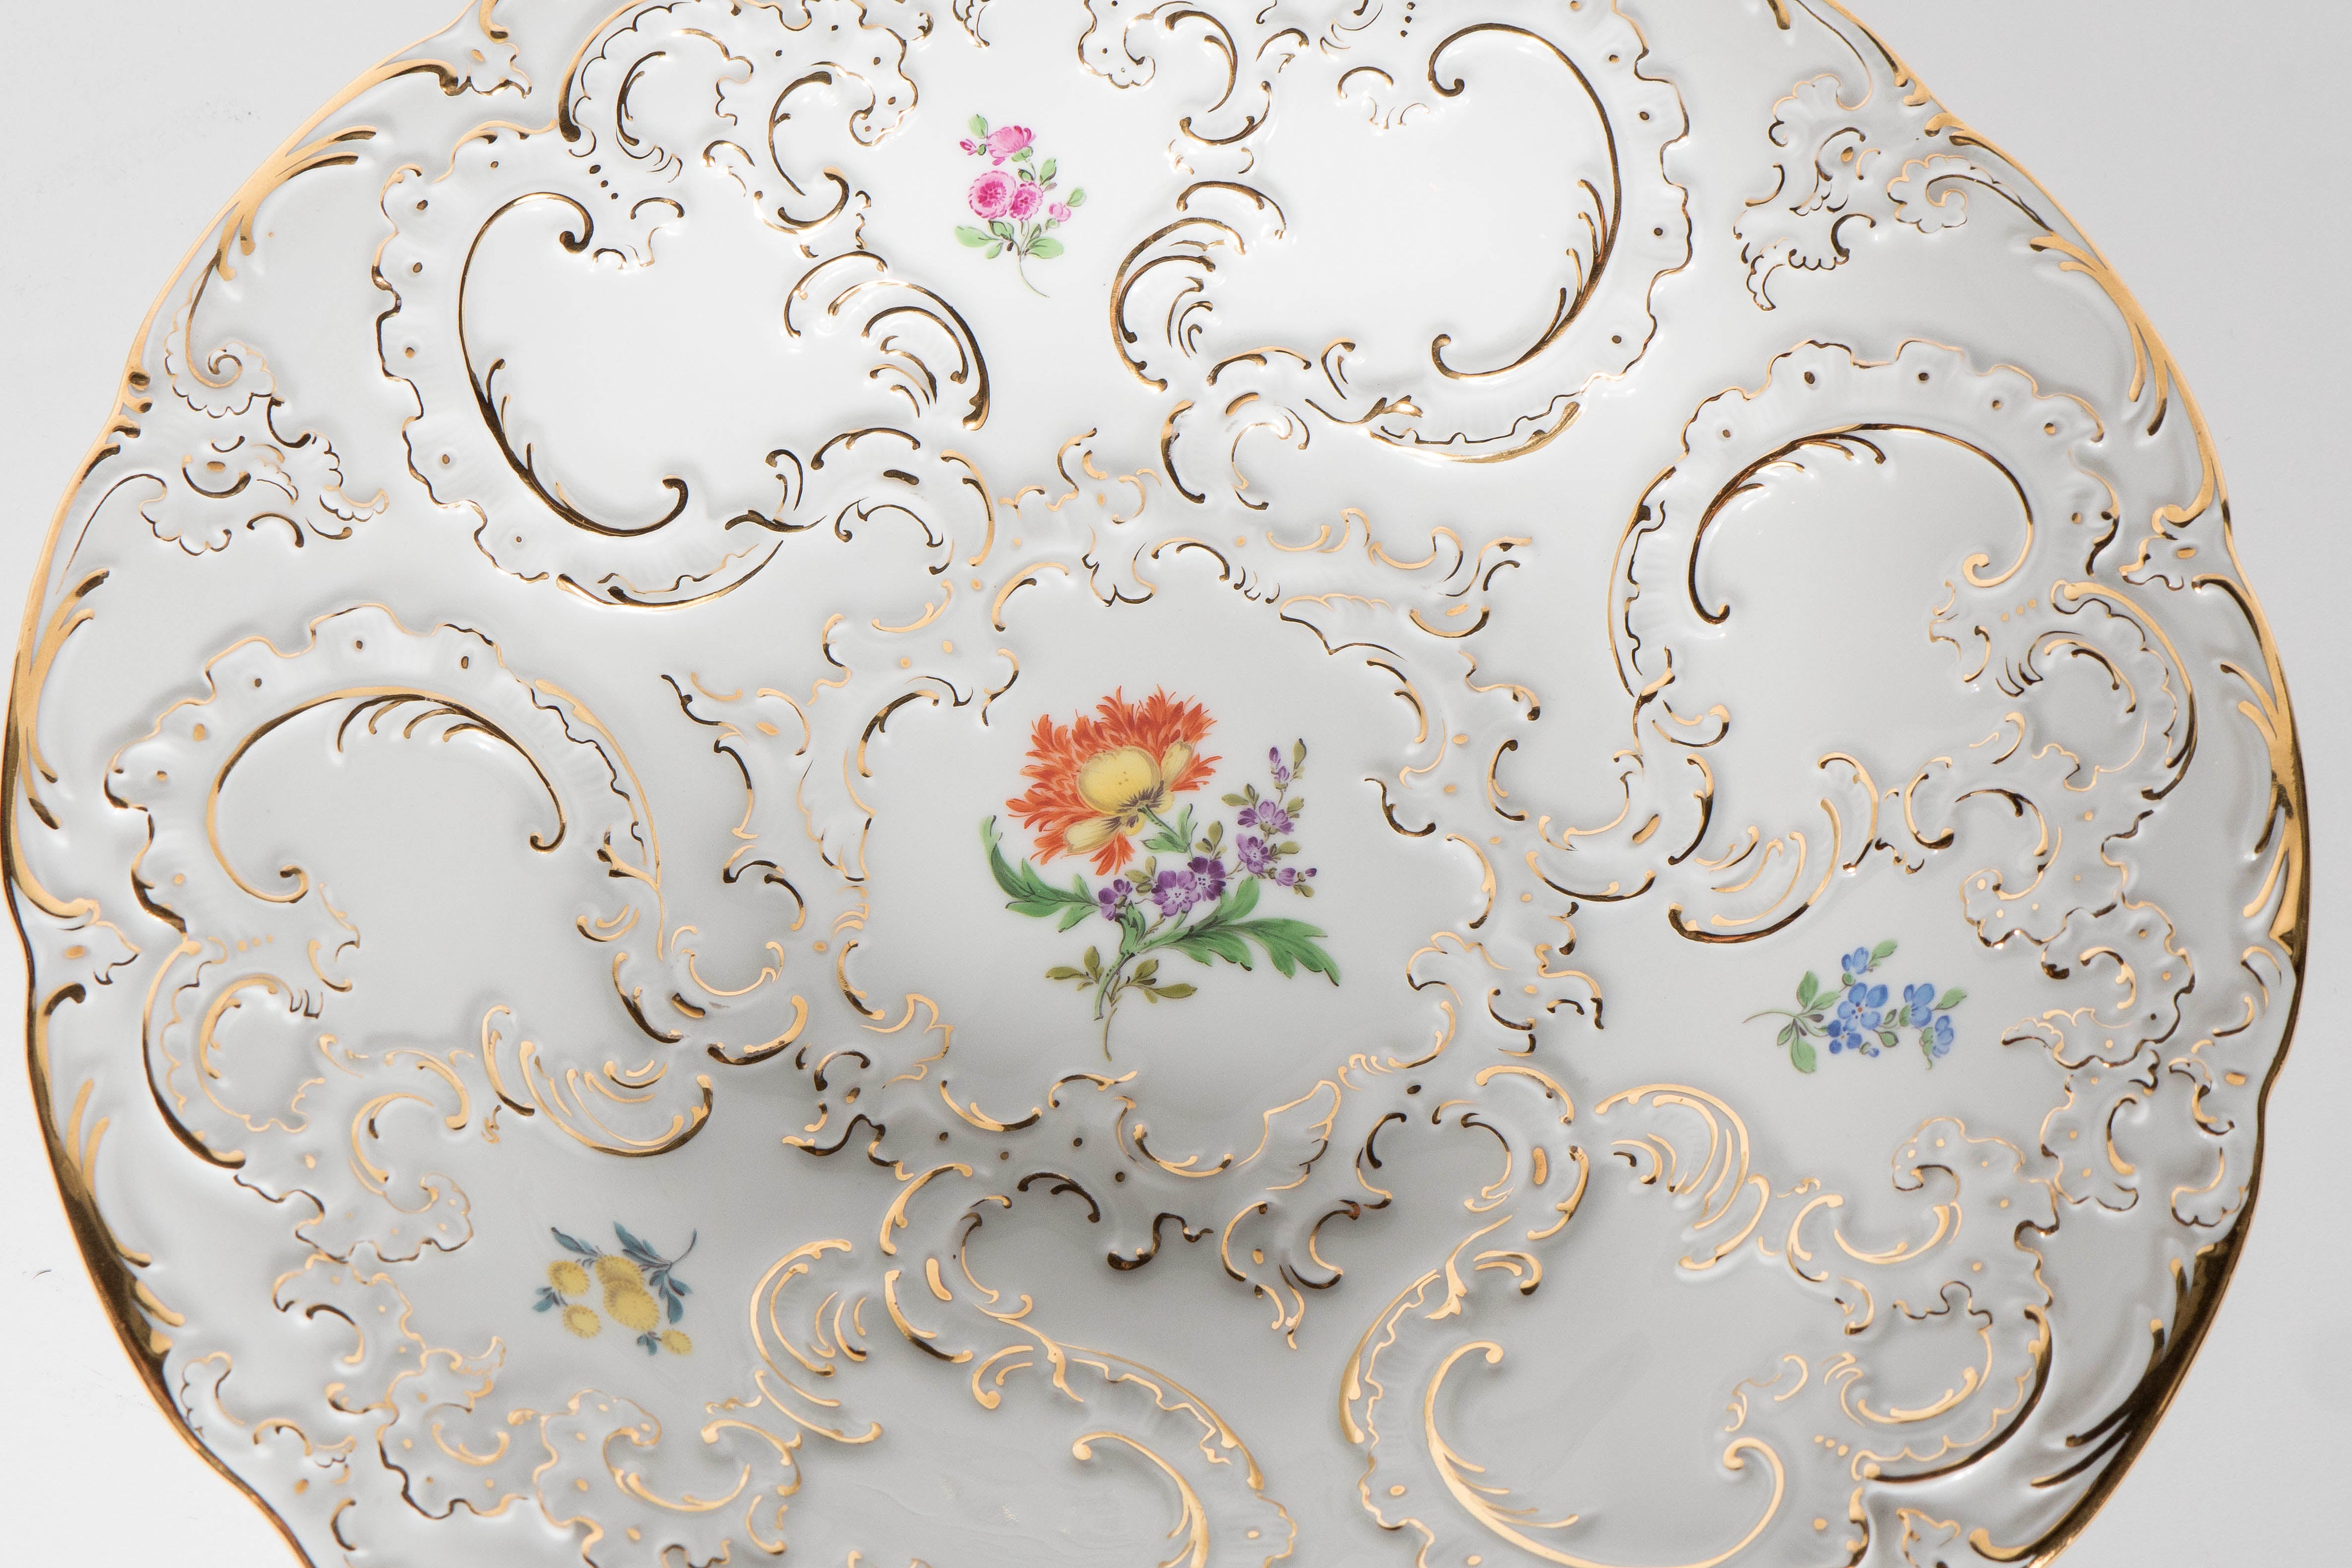 Baroque Revival Exquisite Classical Relief-Form Porcelain Bowl with Floral Design by Meissen